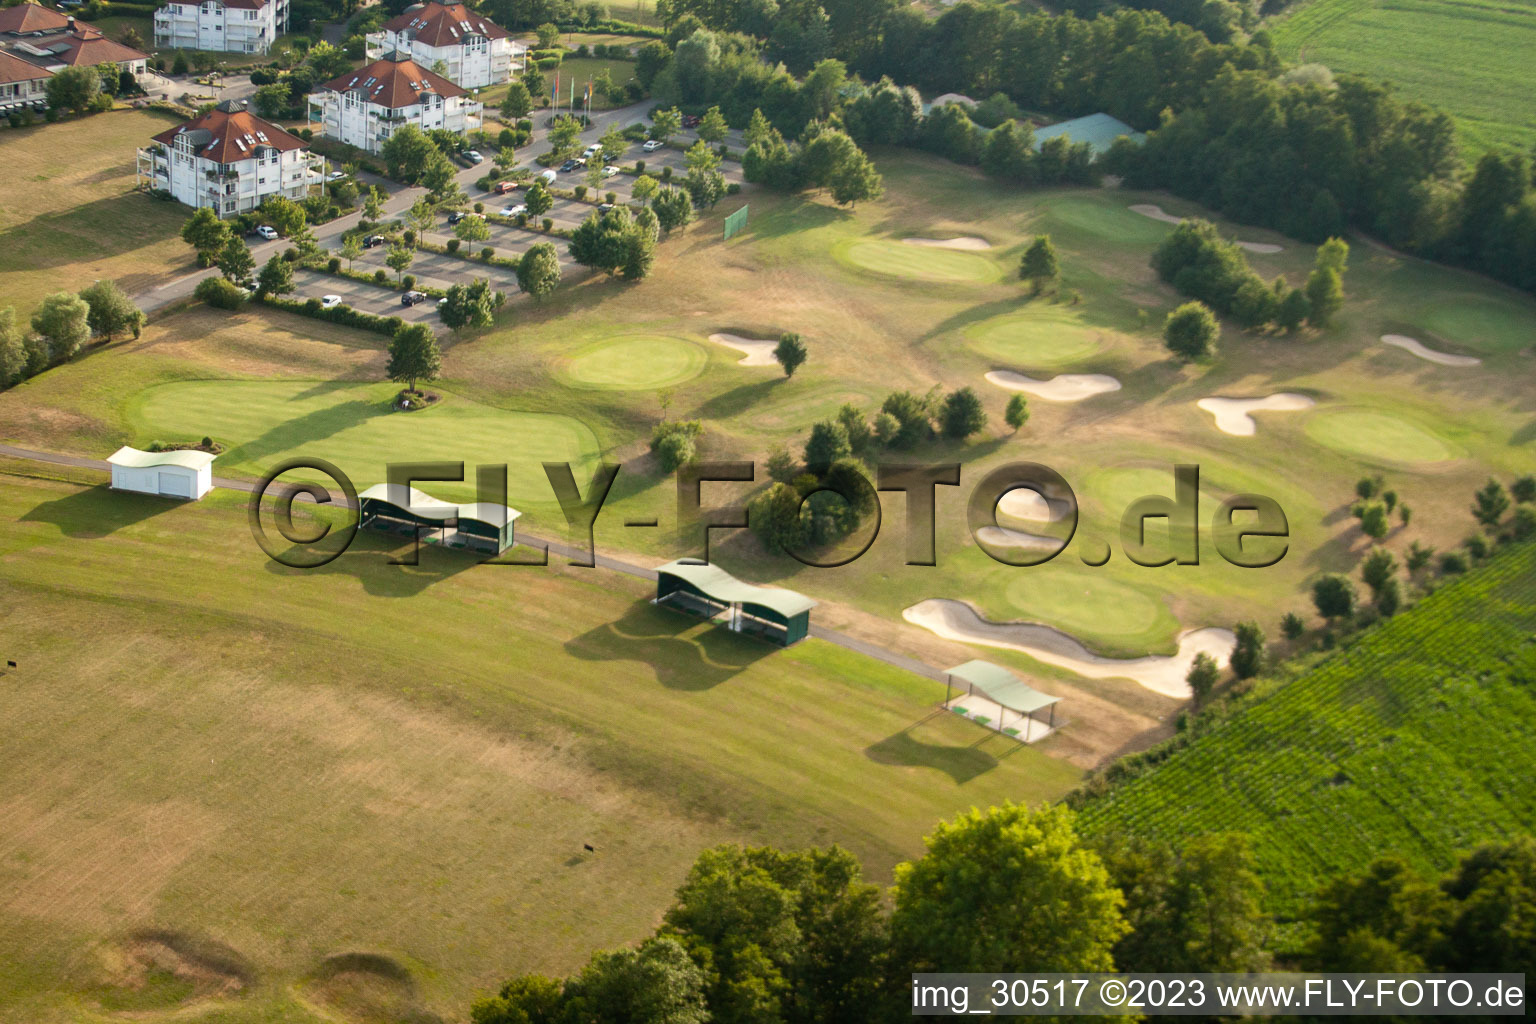 Golf club Soufflenheim Baden-Baden in Soufflenheim in the state Bas-Rhin, France from the drone perspective